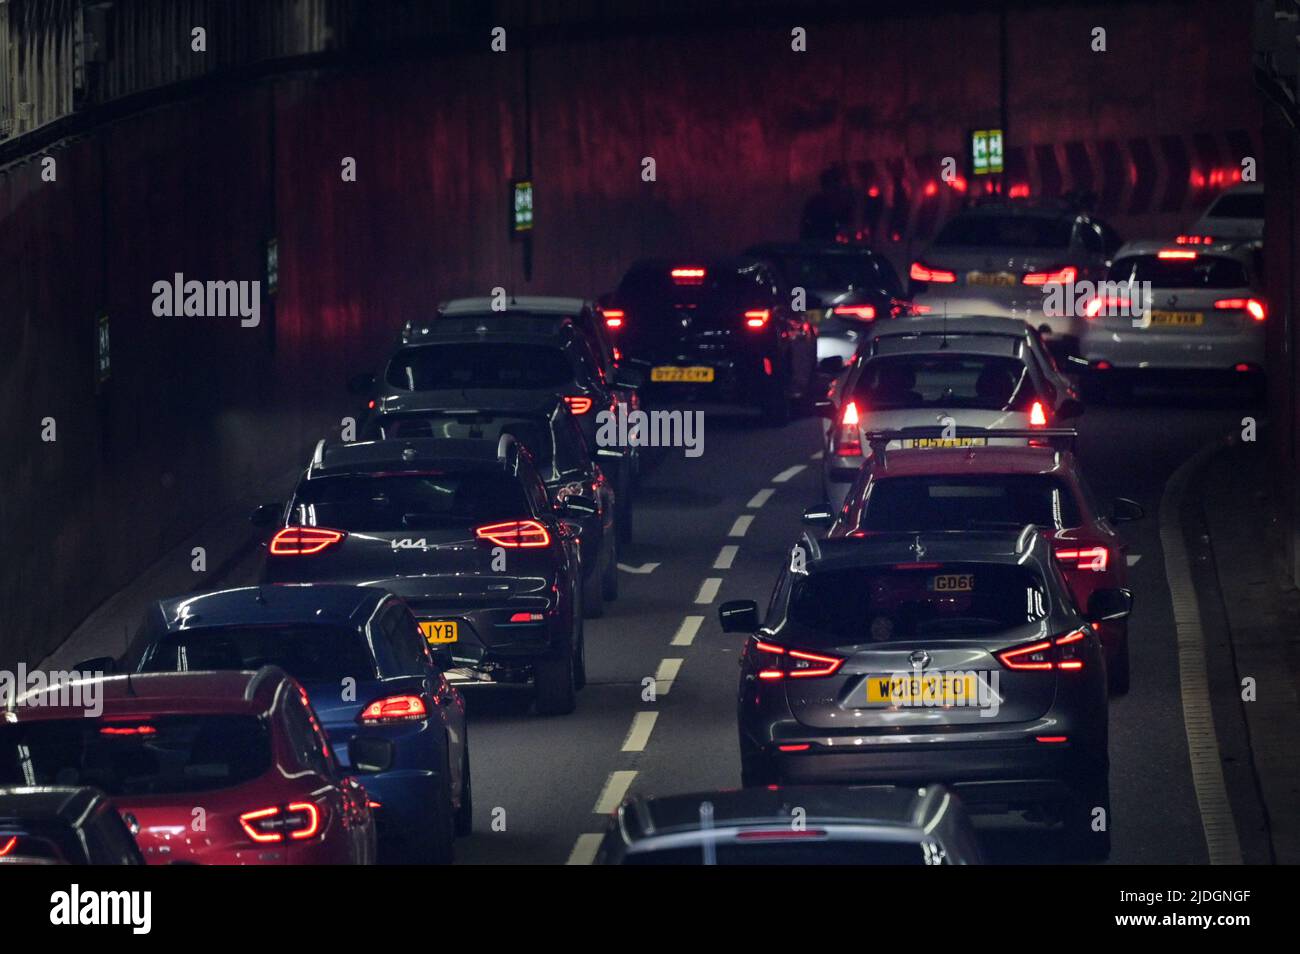 Suffolk Street Queensway, Birmingham, England, June 21st 2022. Commuters have taken to the roads causing gridlock in Birmingham as rail workers walk out on strike for a 7 percent wage increase across the British networks after RMT Unions failed to reach an agreement. Pic by Credit: Sam Holiday/Alamy Live News Stock Photo